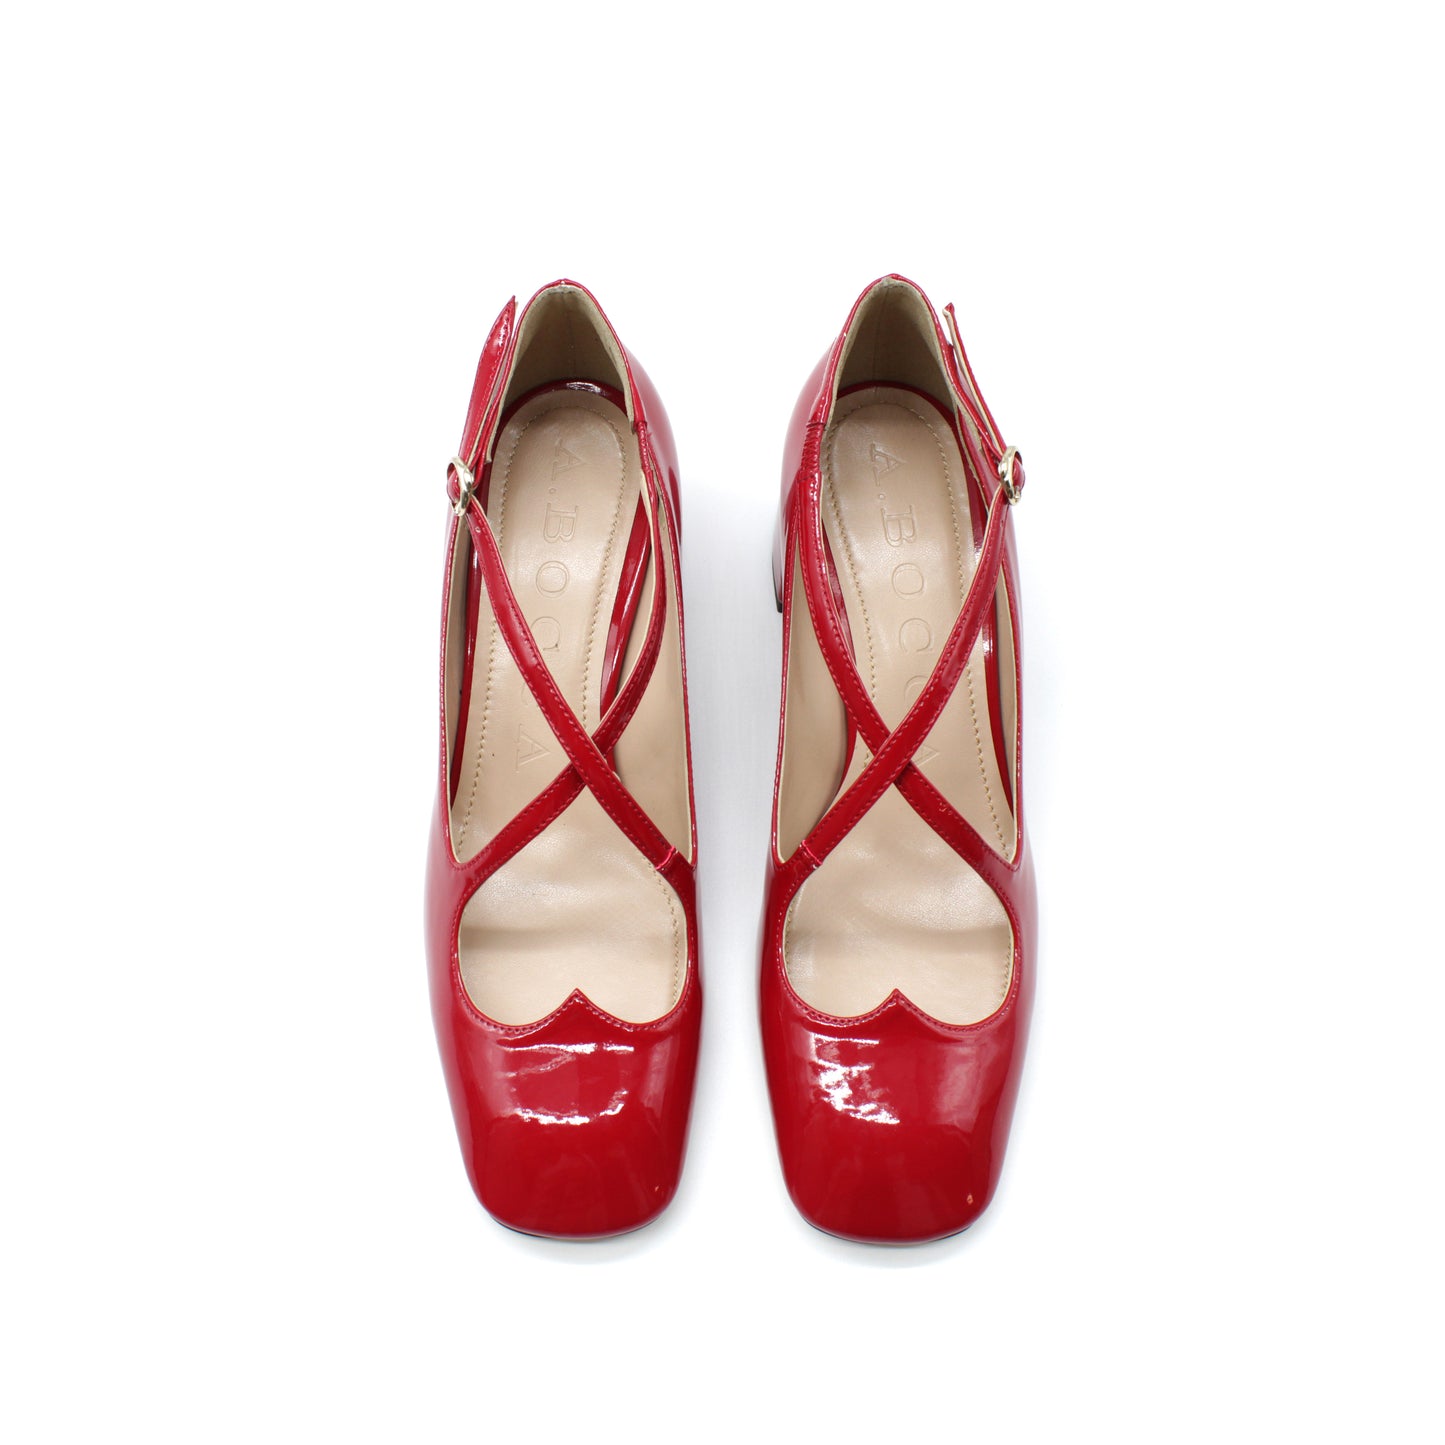 Pump Two for Love in red patent leather - VEGAN